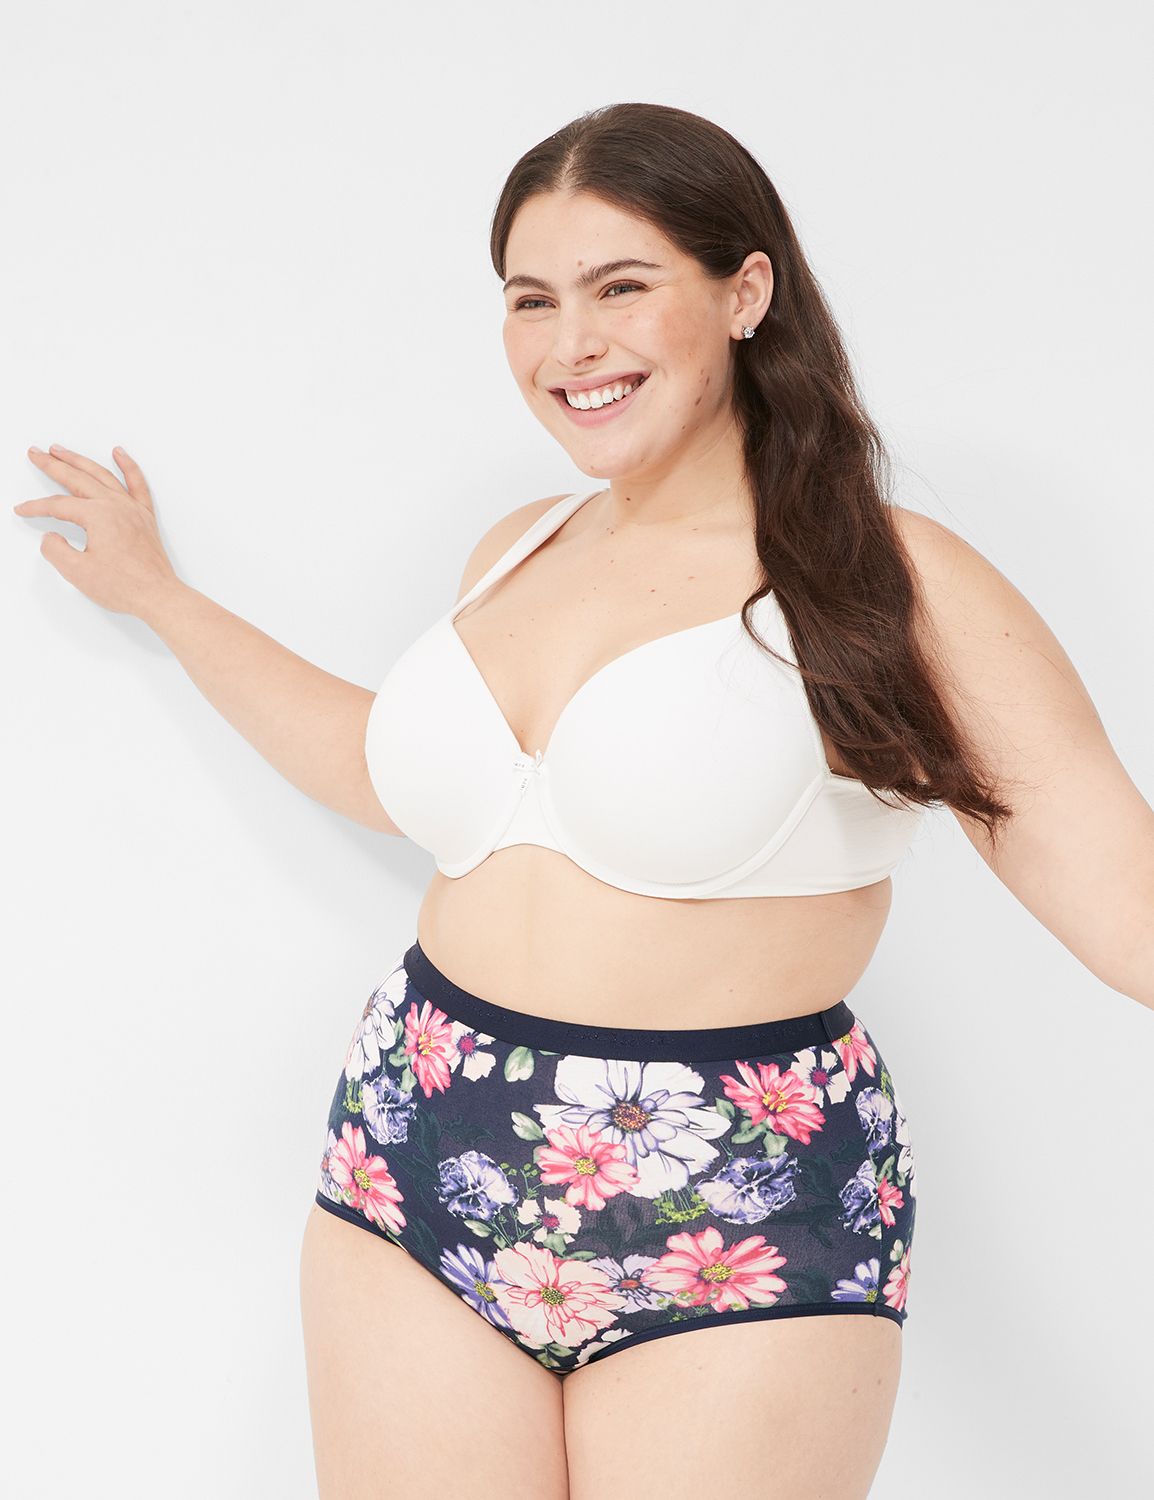 Cacique 42DD // by Lane Bryant Cafe Beige Modern Lightly Lined Lounge Bra  Size undefined - $20 - From Gayle